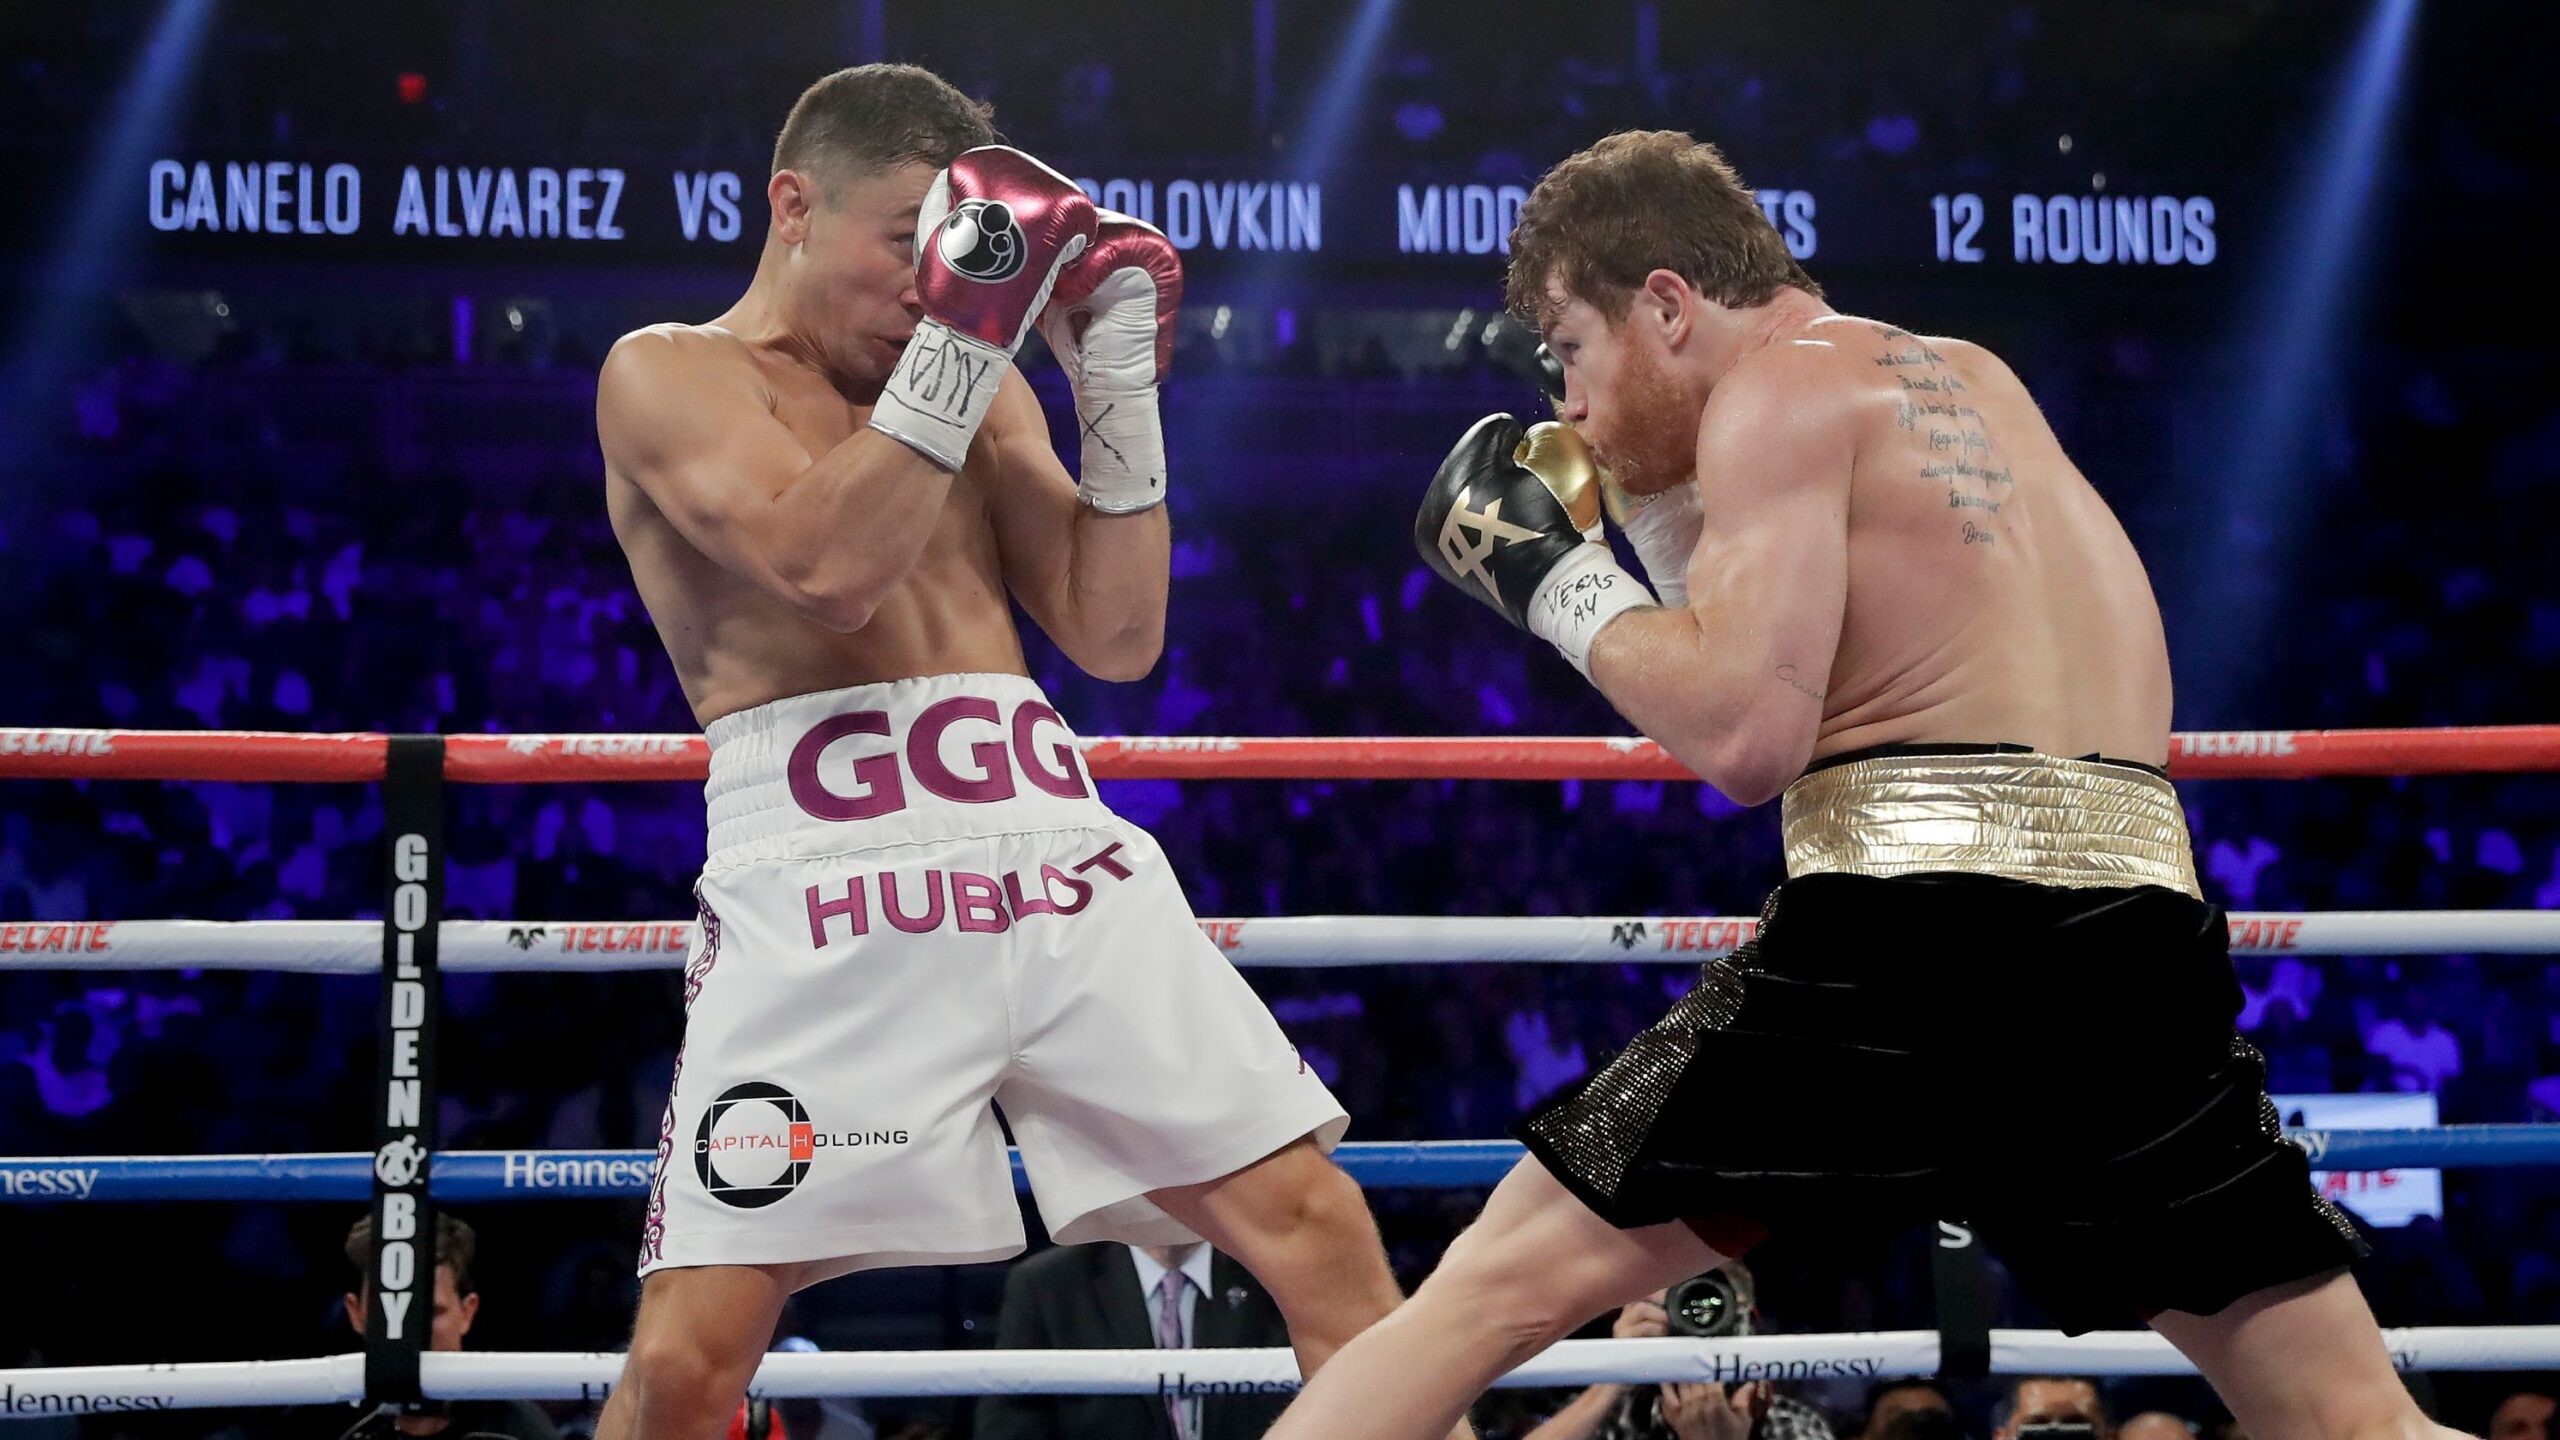 Canelo Alvarez Wins Middleweight Title by Majority Decision Over Gennady “GGG” Golovkin